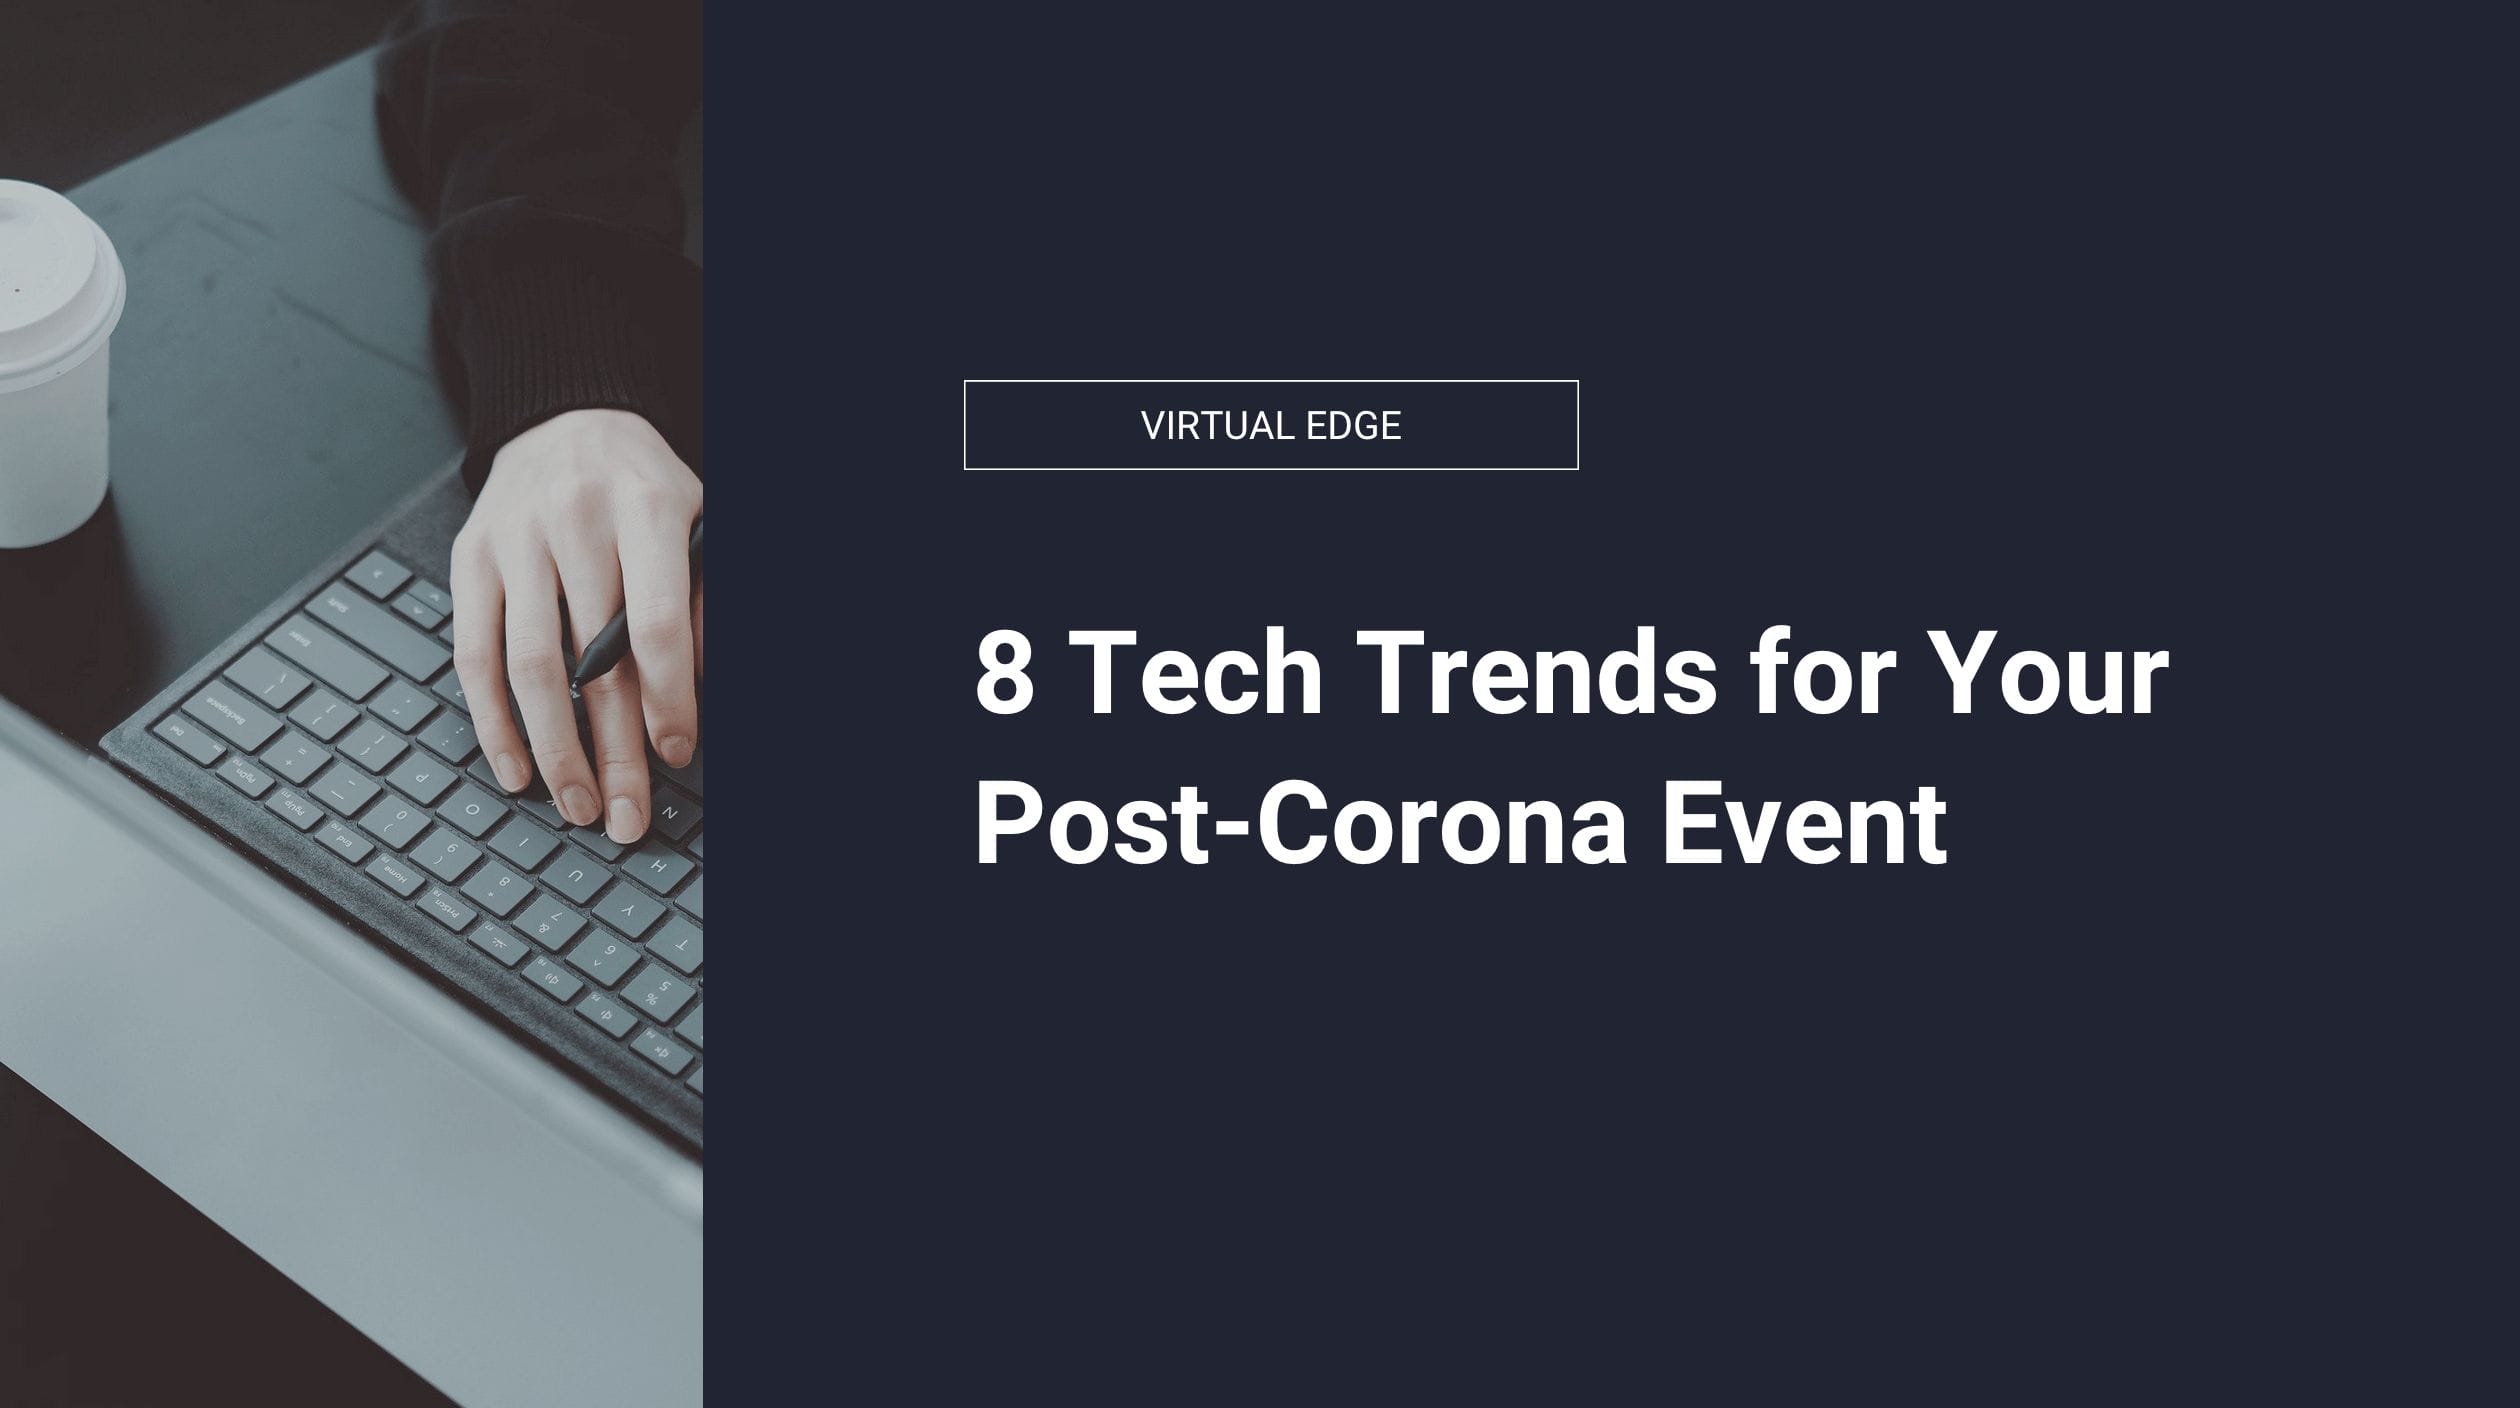 8 Tech Trends for Your Post-Corona Event